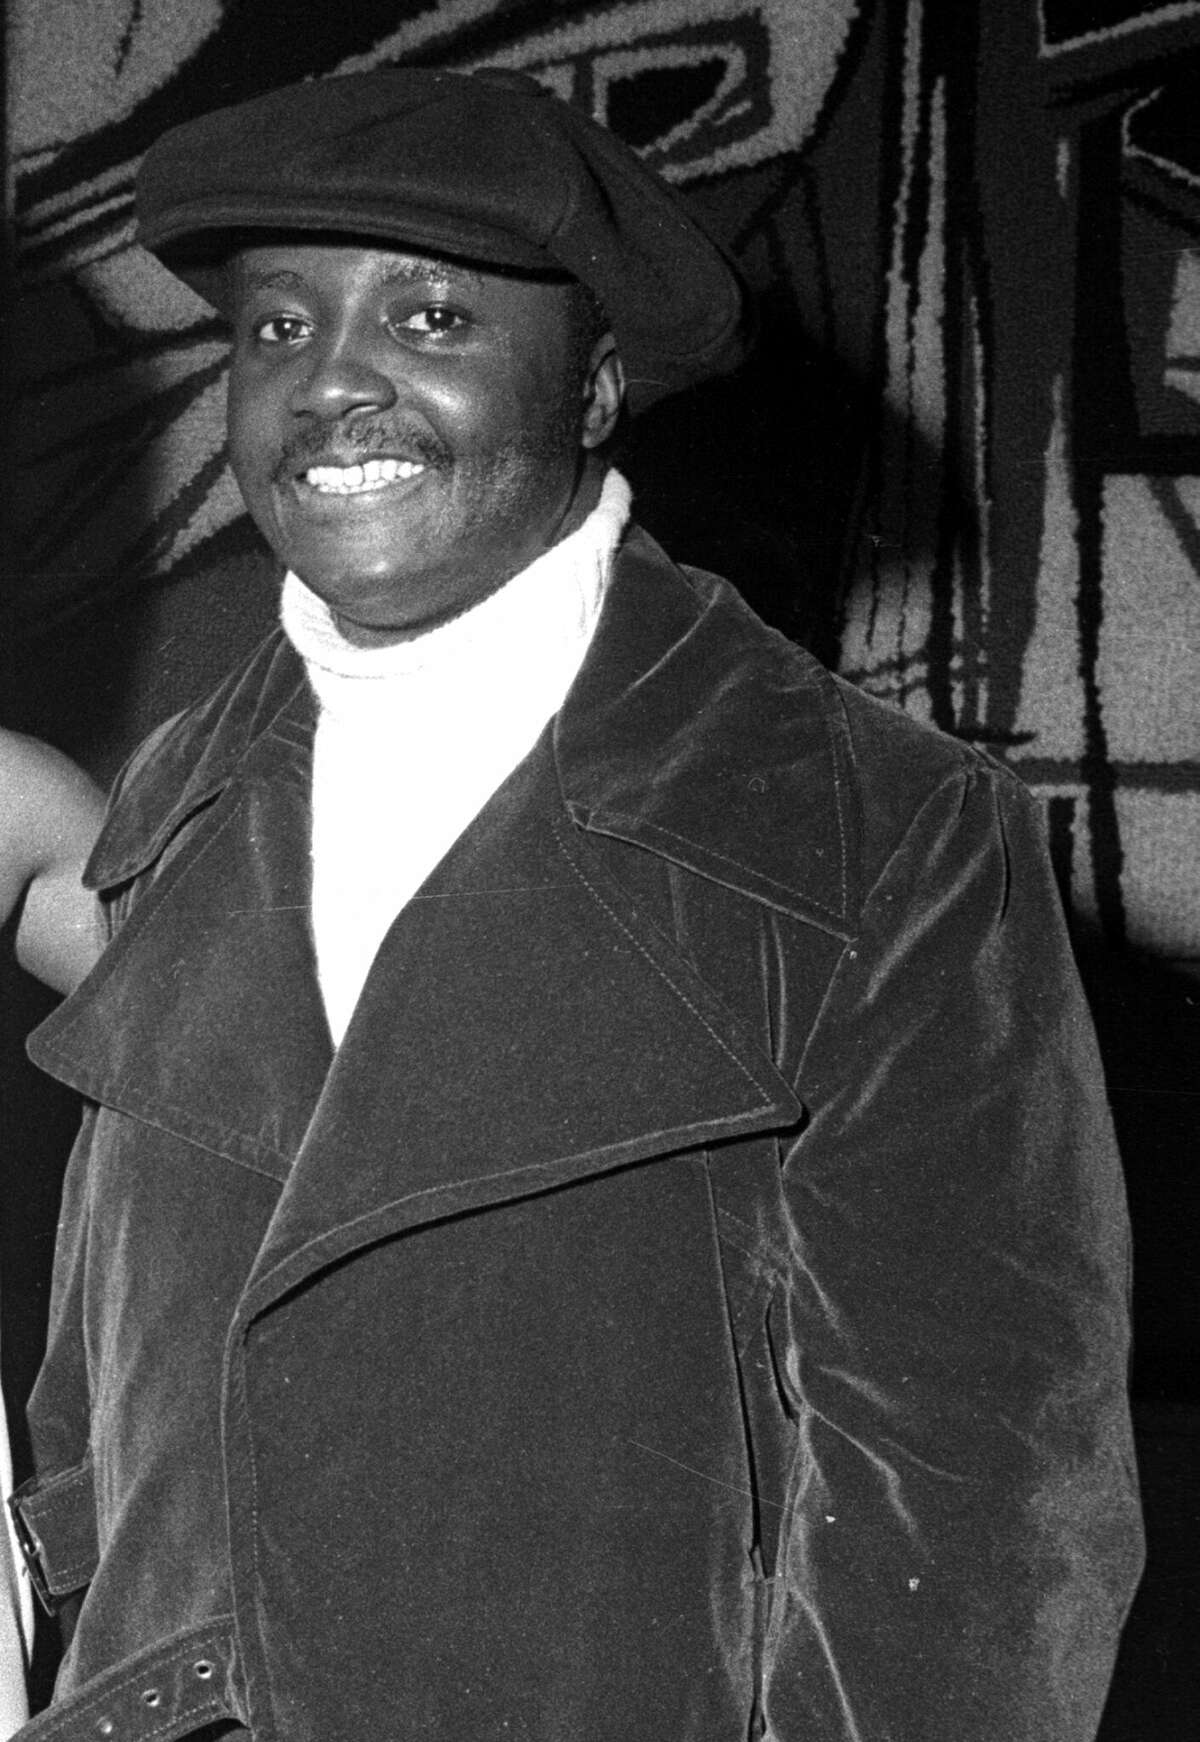 Donny Hathaway stands for the camera wearing an overcoat and cap.